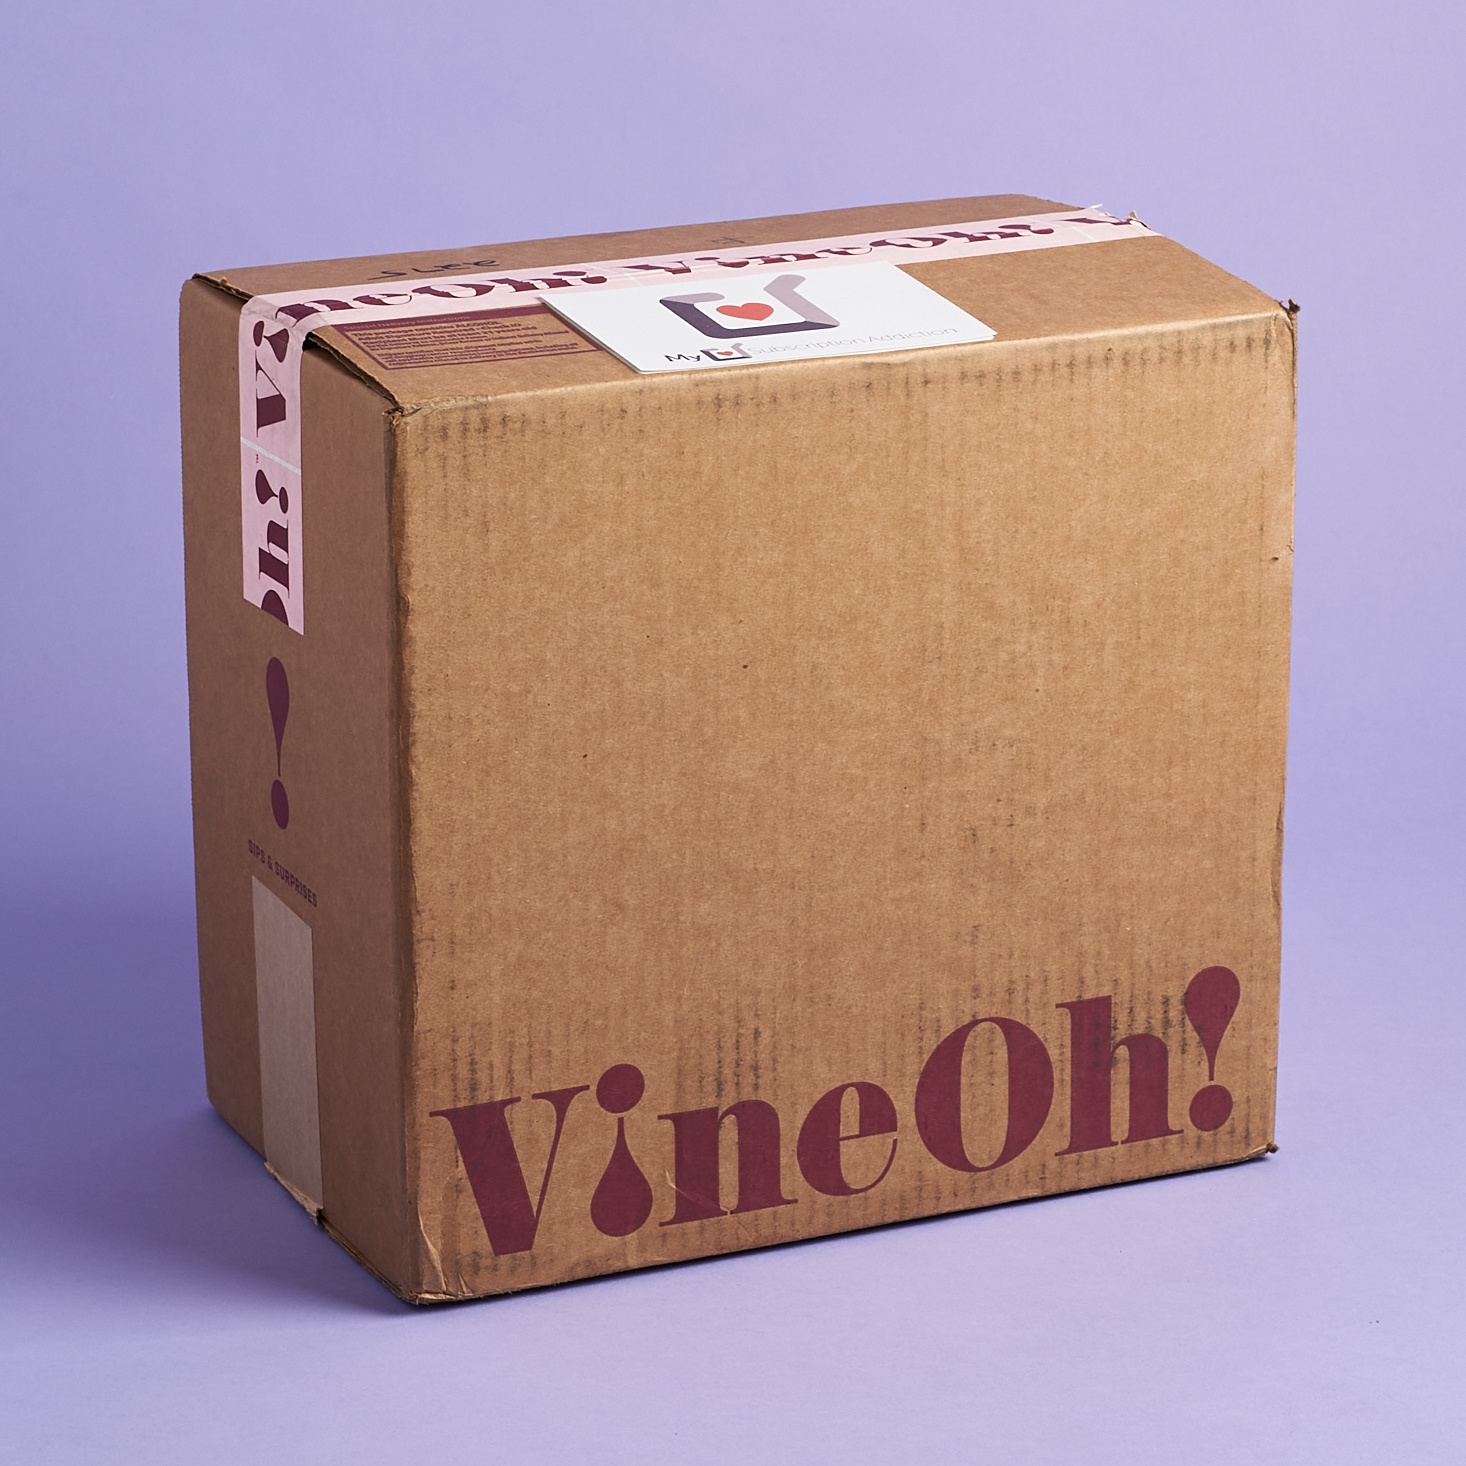 Vine Oh! “Oh! Summer Fun!” Review + Coupon – Summer 2020